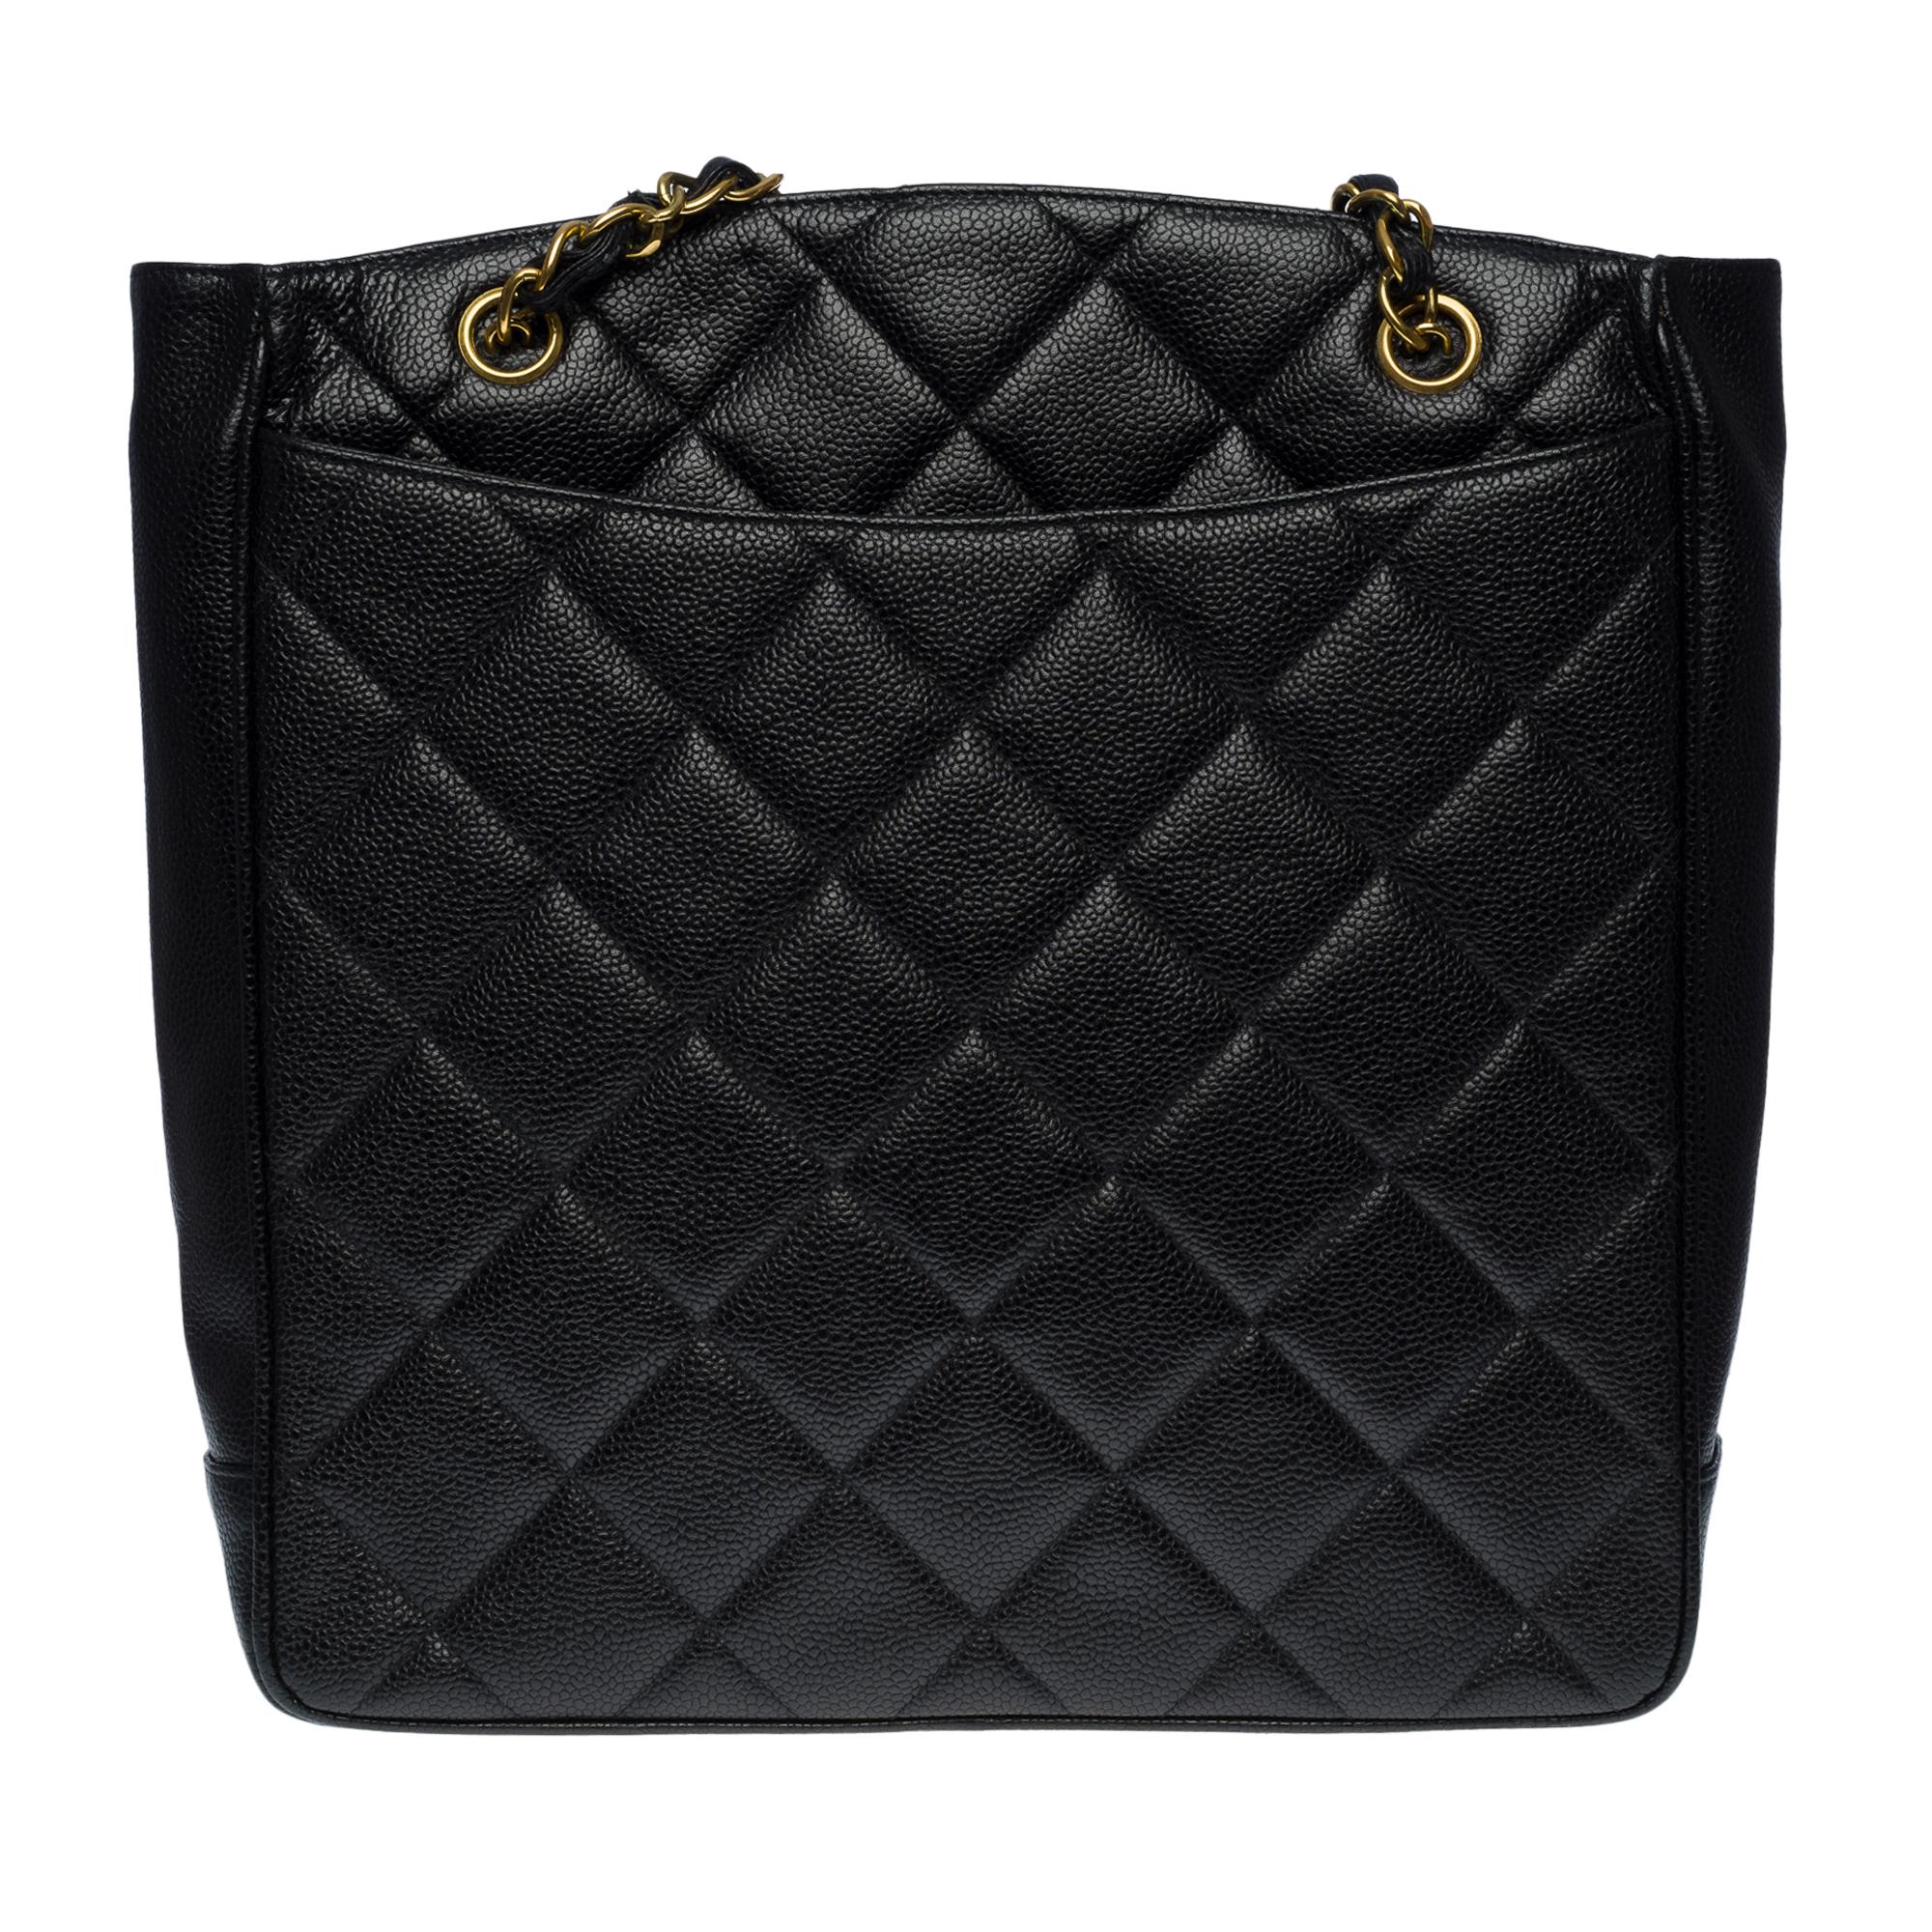 Exceptional Tote bag Chanel Shopping vintage black quilted Caviar leather, gold-plated metal hardware, double gold-plated metal chain-handle interlaced with black leather for hand or shoulder support
Black leather lining, 2 zippered